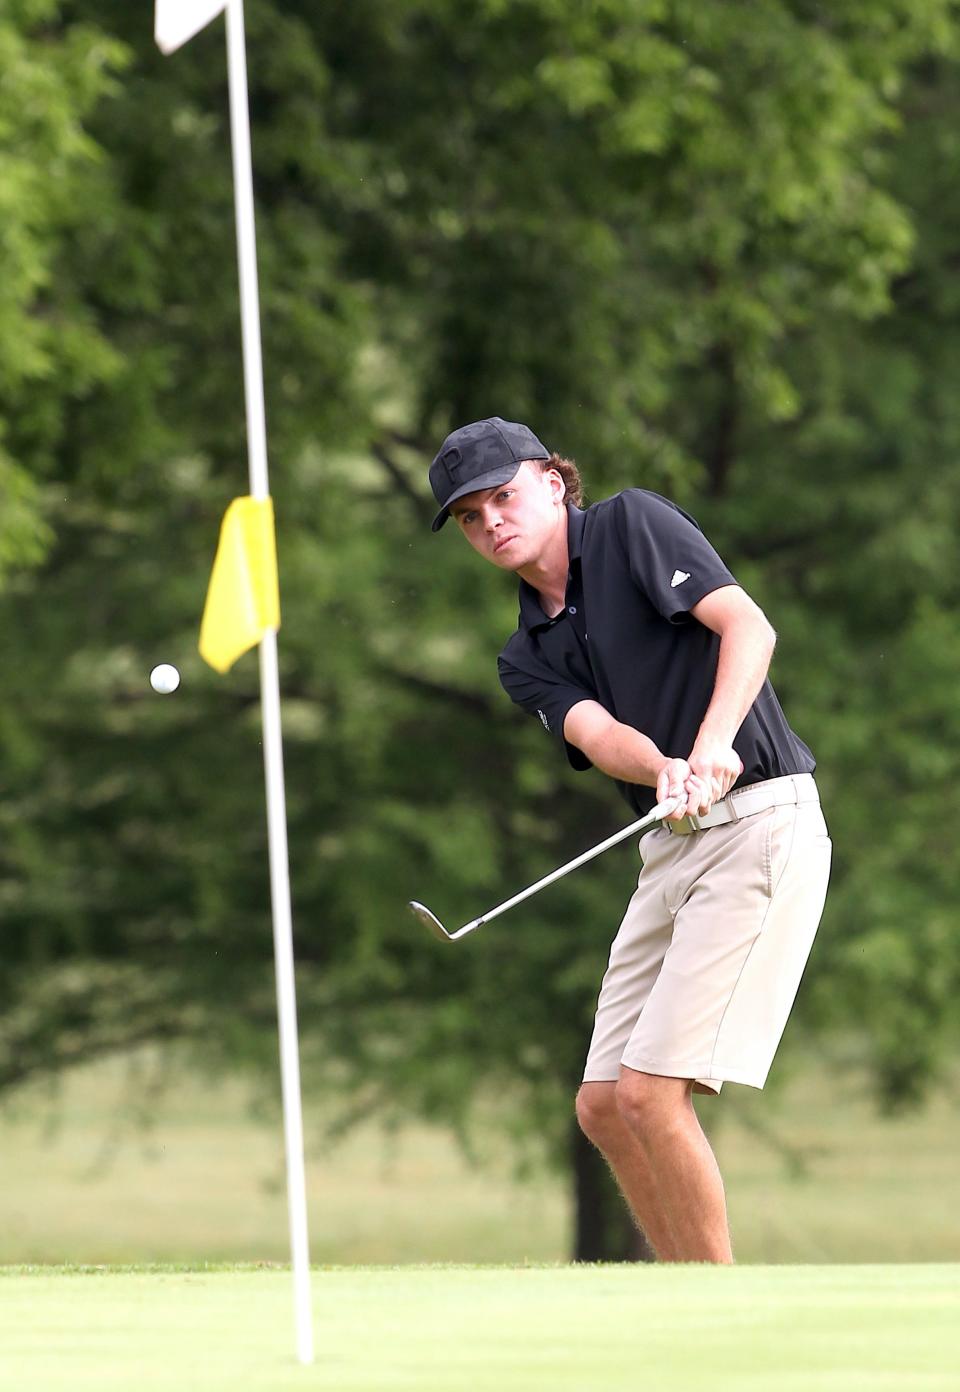 Logan Vernon chips onto the first green at Cascades Golf Course Saturday, June 25, 2022, during the Men's City Golf Qualifying Tournament. The college senior took the first-round lead with a three-under 68.